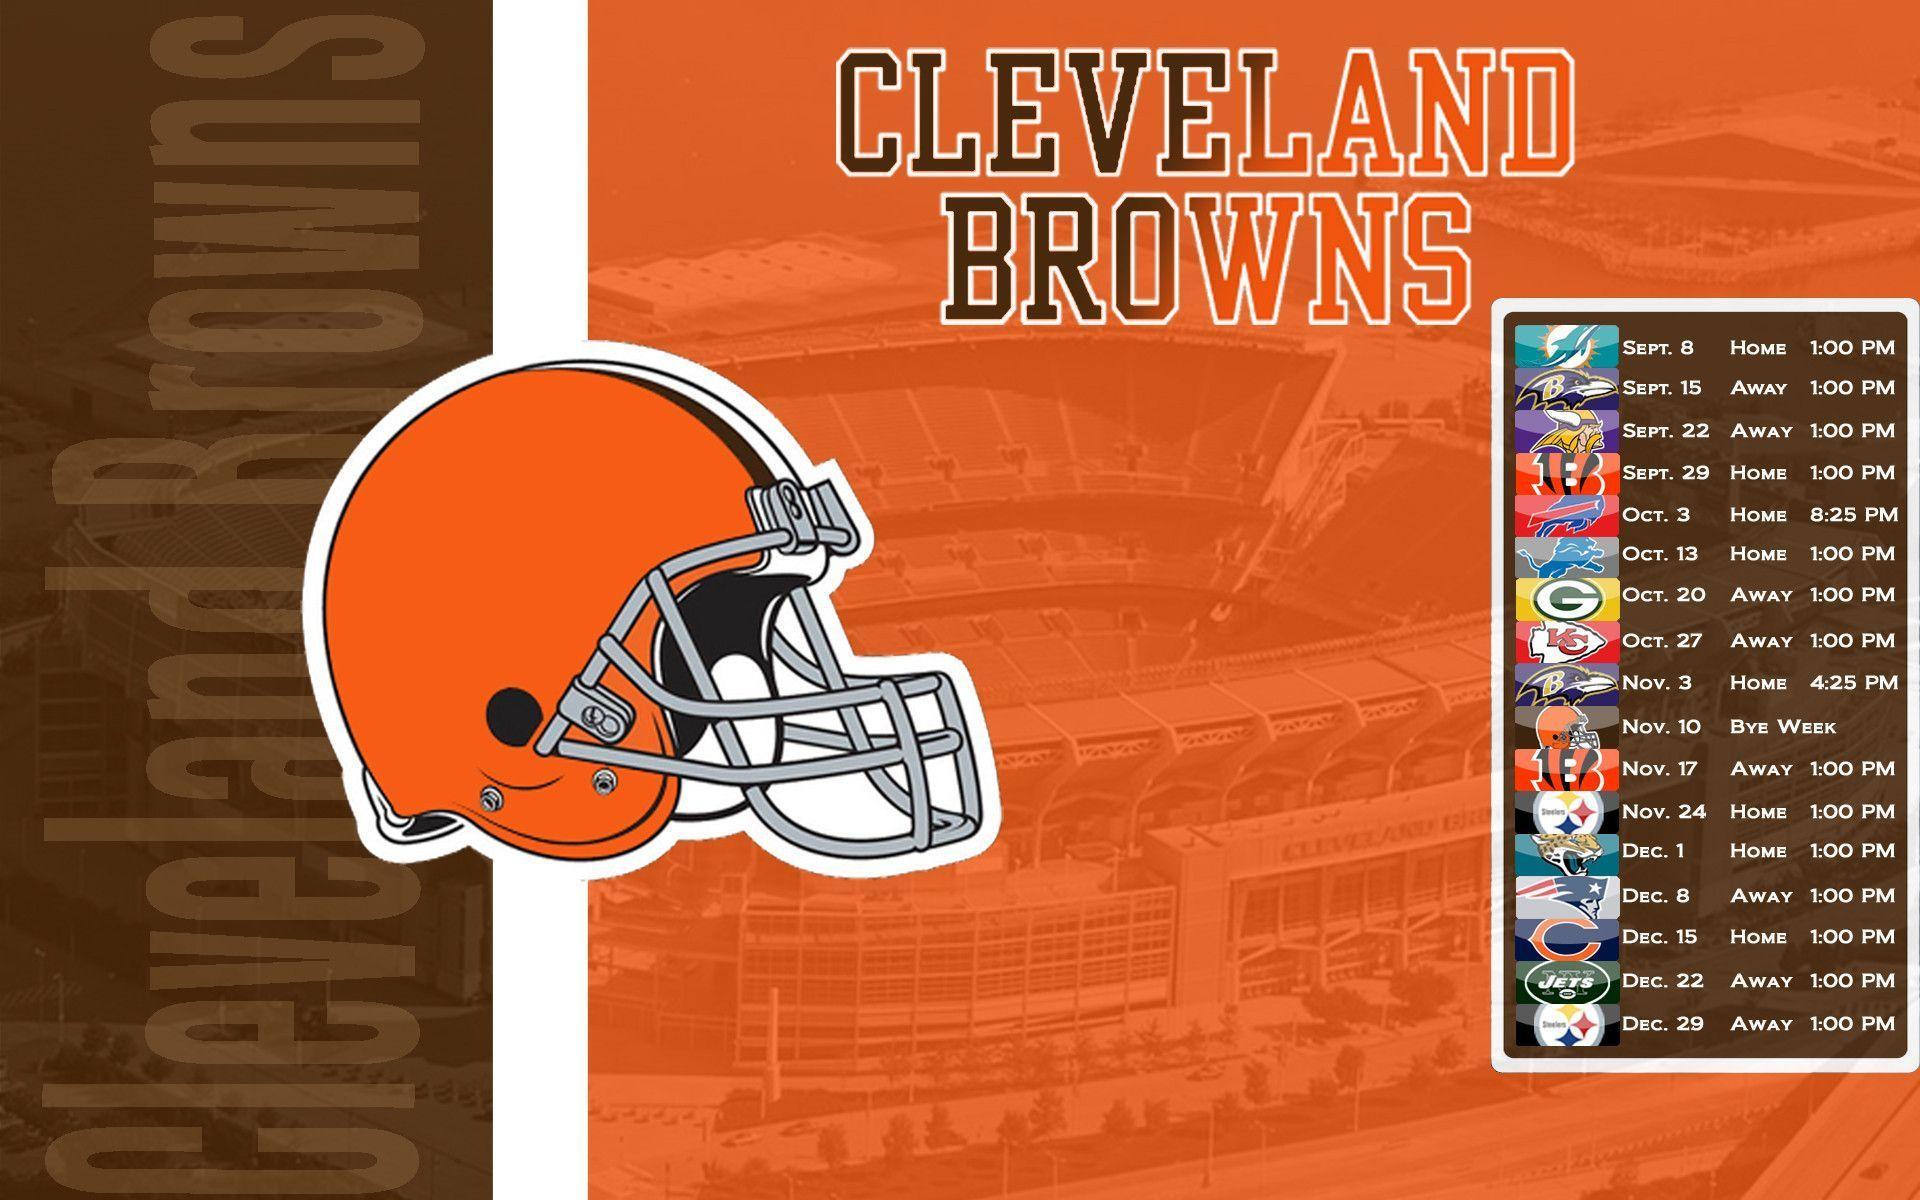 Cleveland Browns Wallpaper HD. Wallpaper, Background, Image